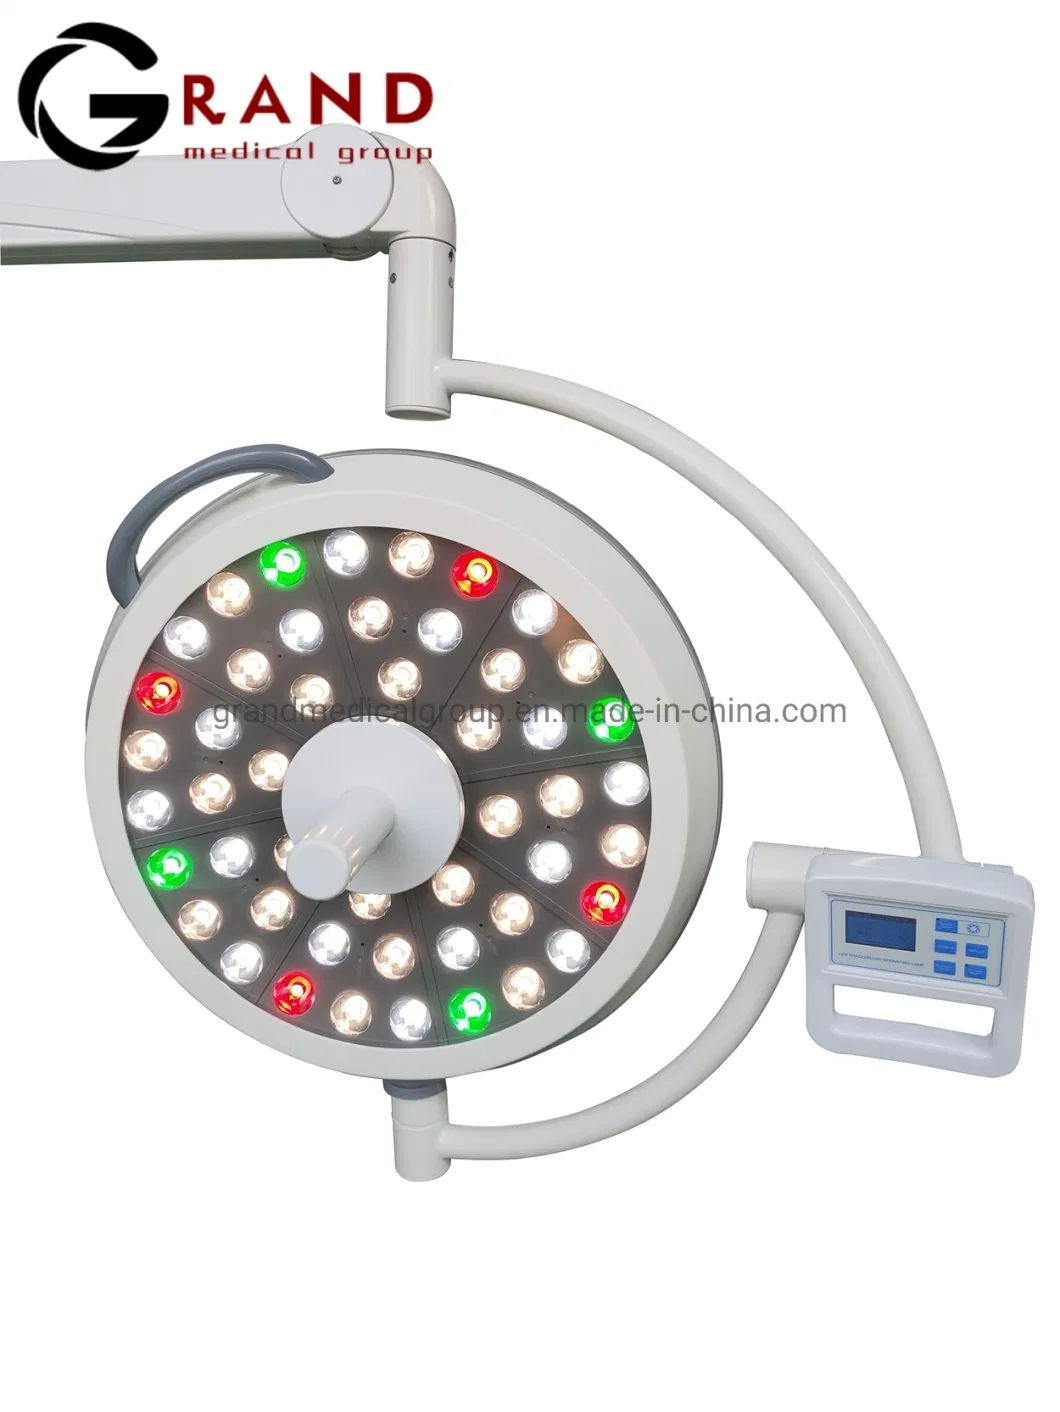 LED Operating Theater Light Surgical Ot Light Surgery Lamp Surgical Instrument LED Shadowless Lamp Operating Room Shadowless Lamp